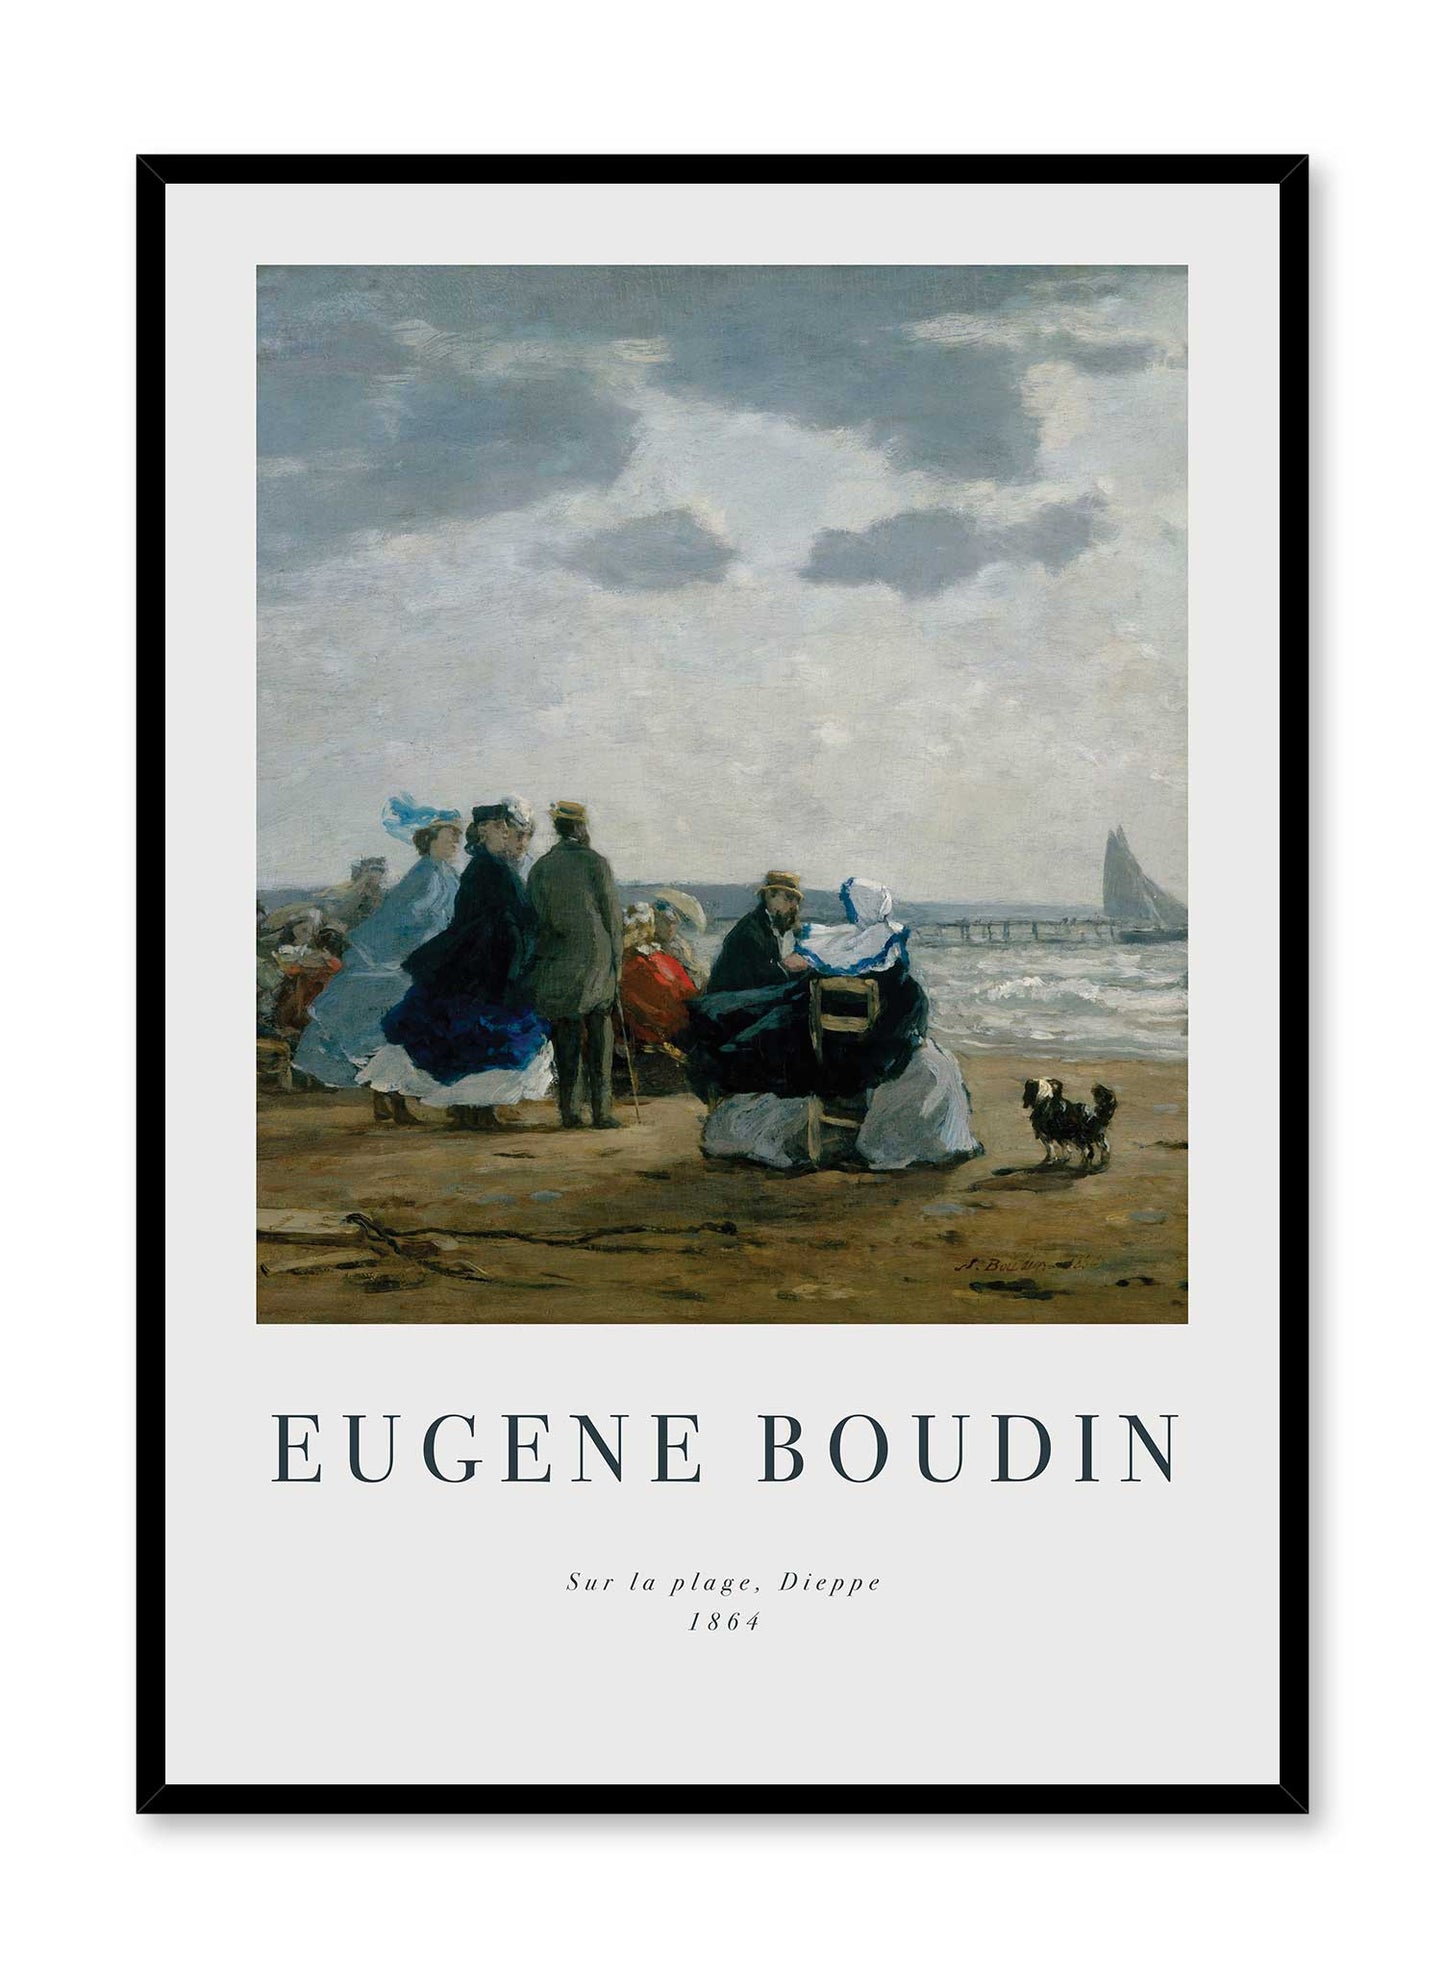 On the Beach, Dieppe is a minimalist artwork by Opposite Wall of Eugene Boudin's Sur la plage, Dieppe from 1864.